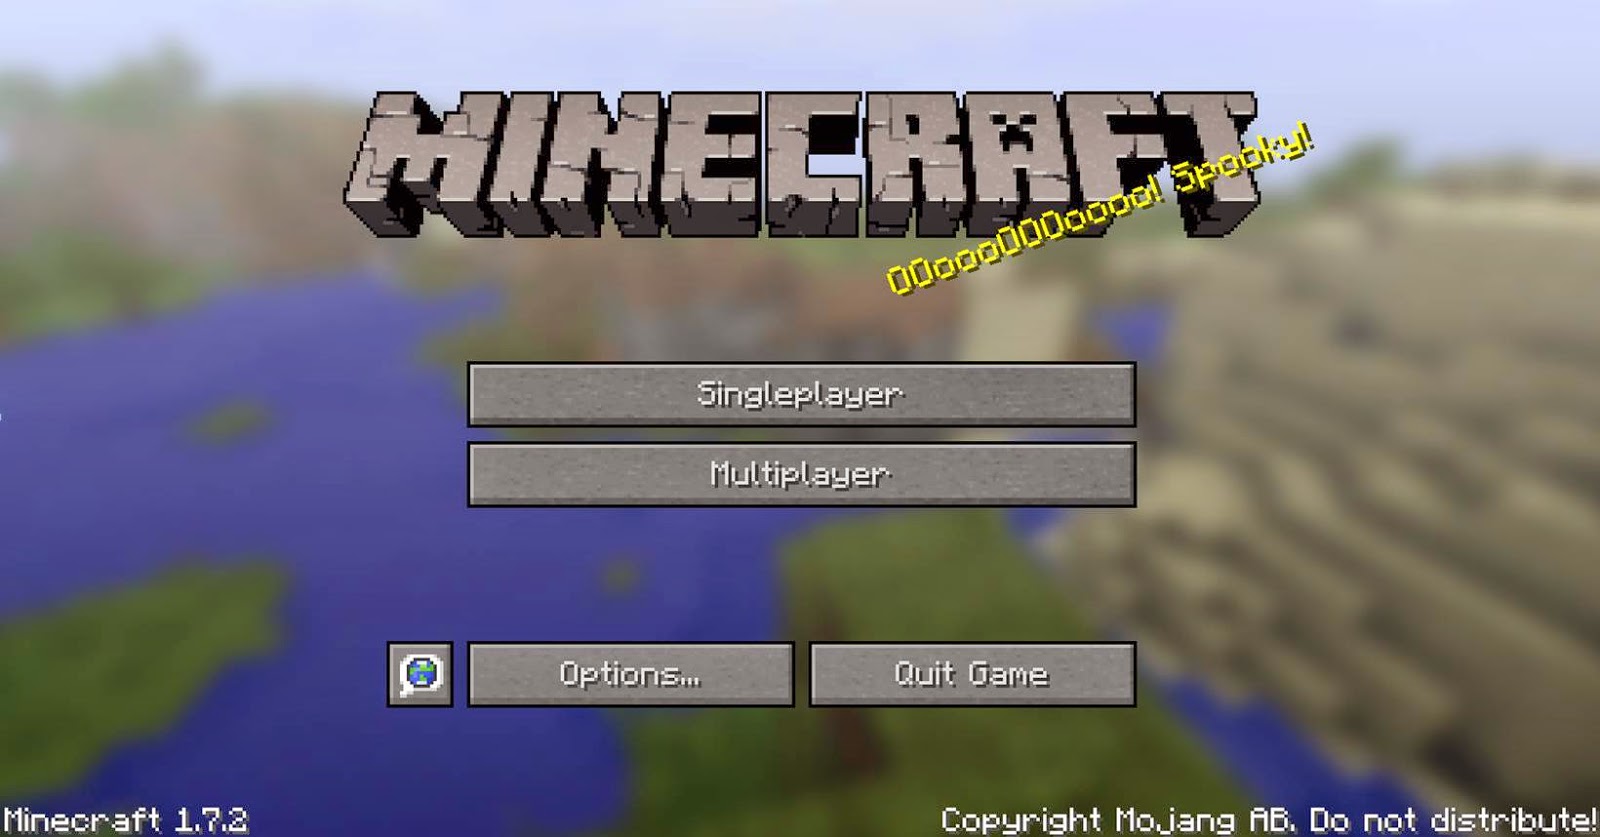 Minecraft download free full version 1.7.5 cracked